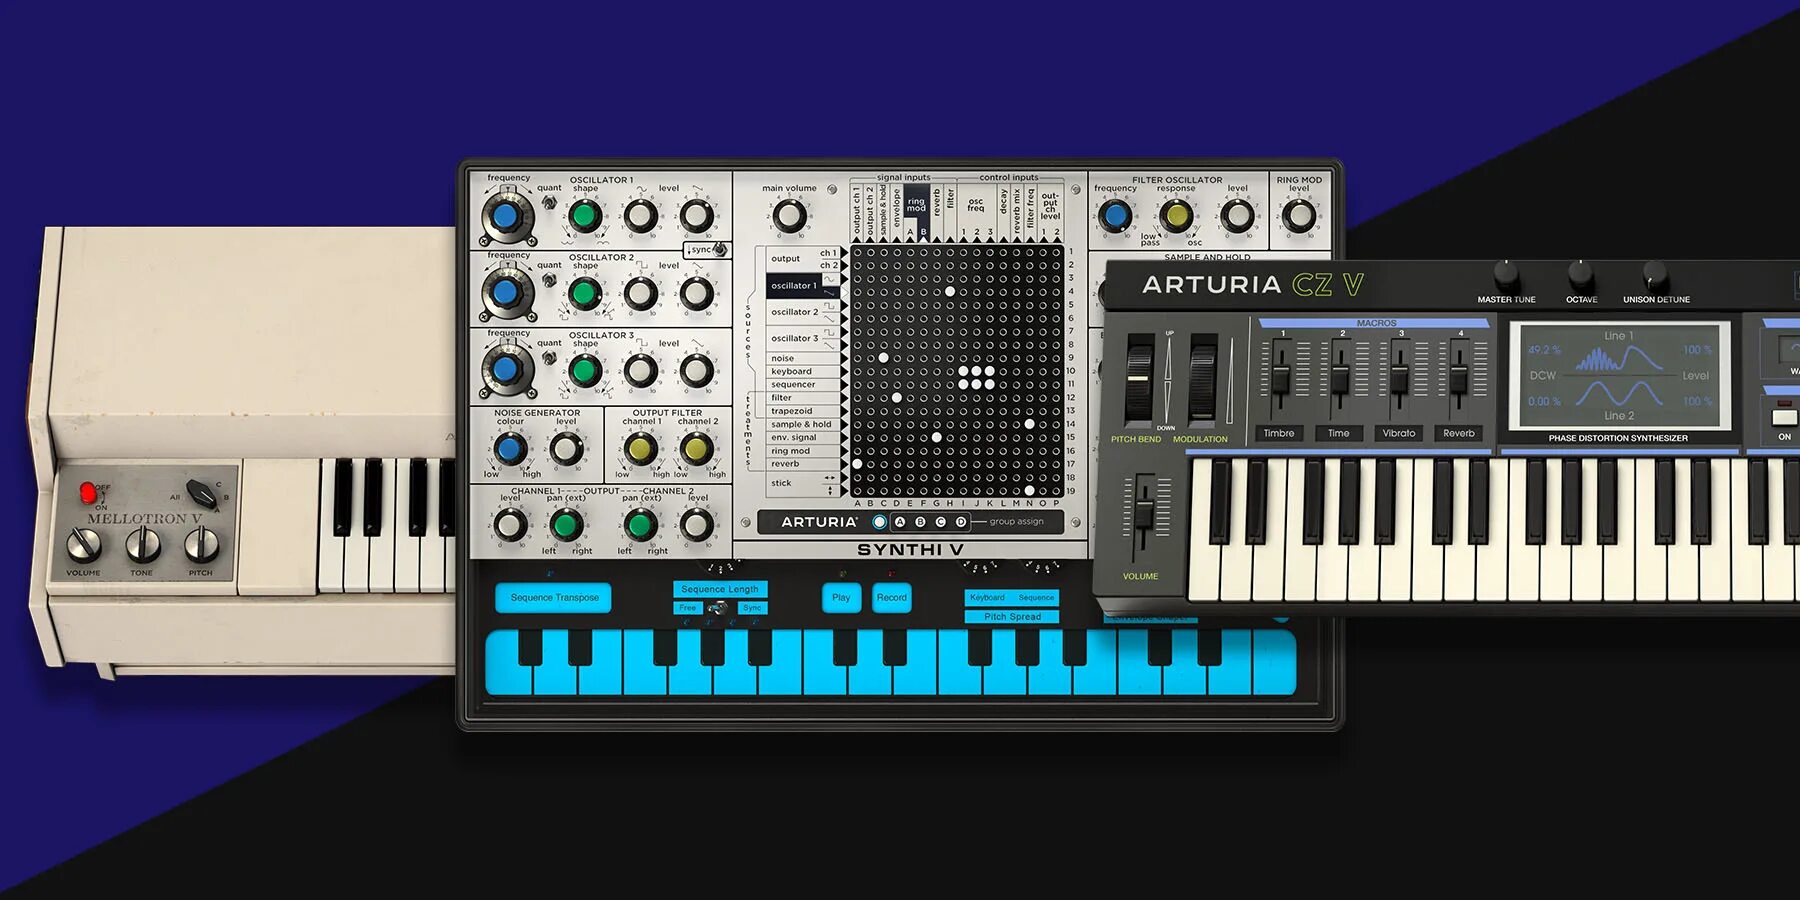 Arturia v collection 9. Arturia VST V collection 7. Arturia Synth v-collection. Arturia - Synths v collection. Vst collection